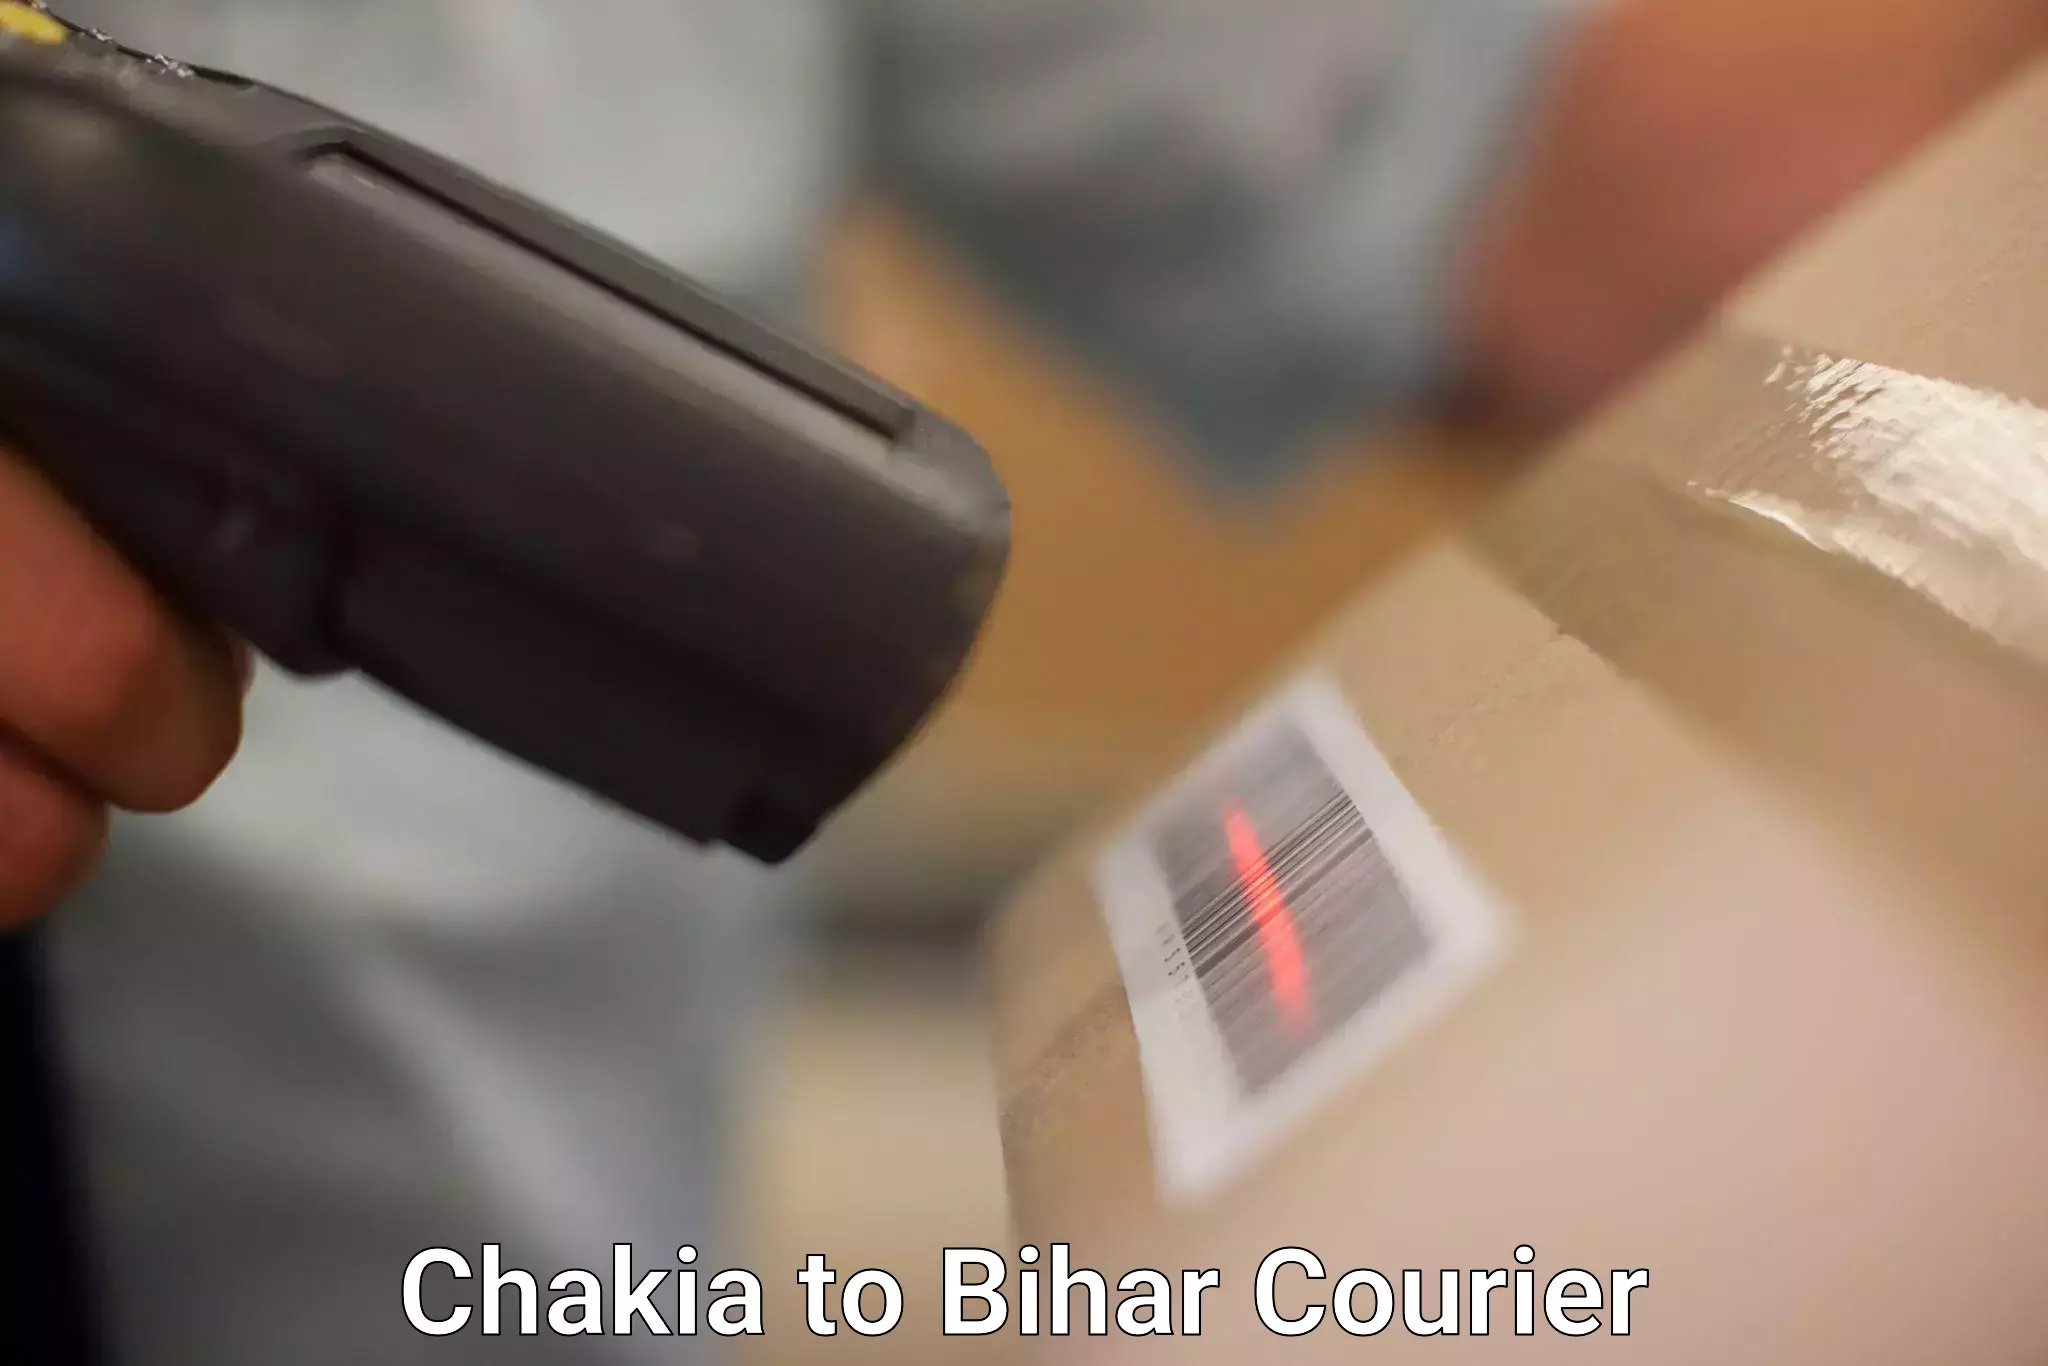 Subscription-based courier Chakia to Bihta